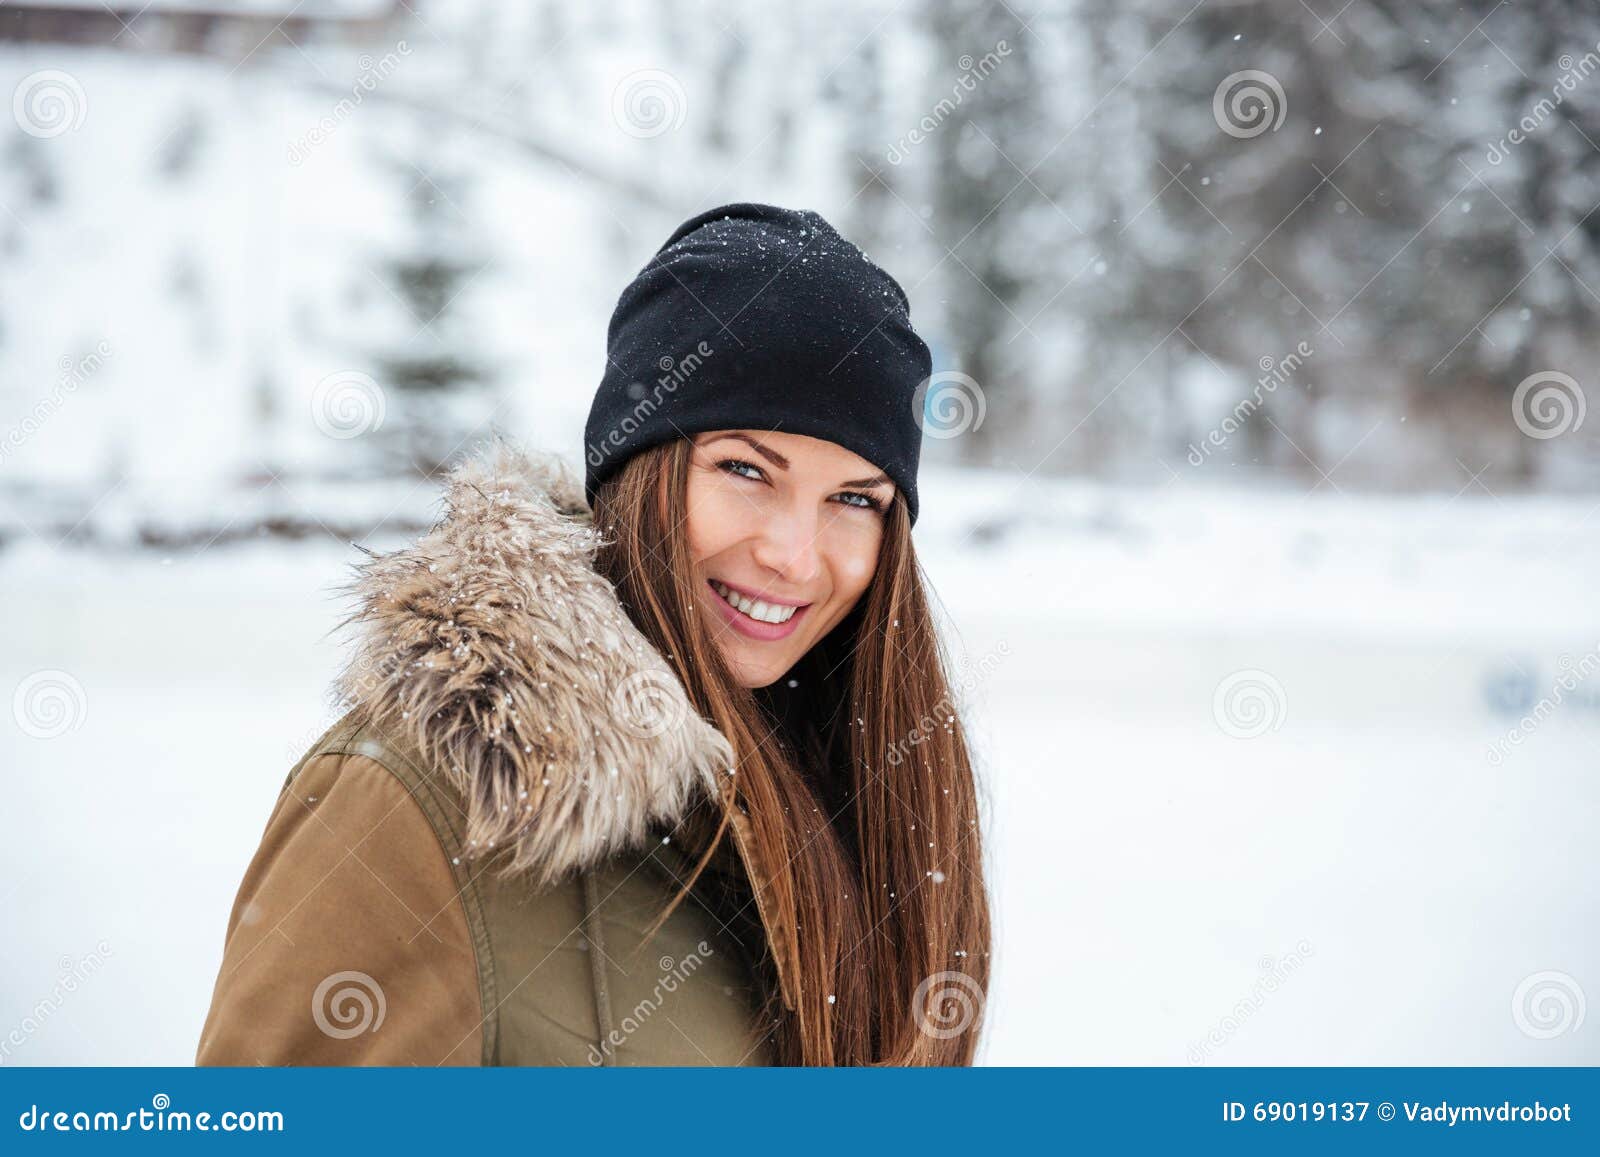 Smiling Woman Looking at Camera Outdoors Stock Image - Image of looking ...